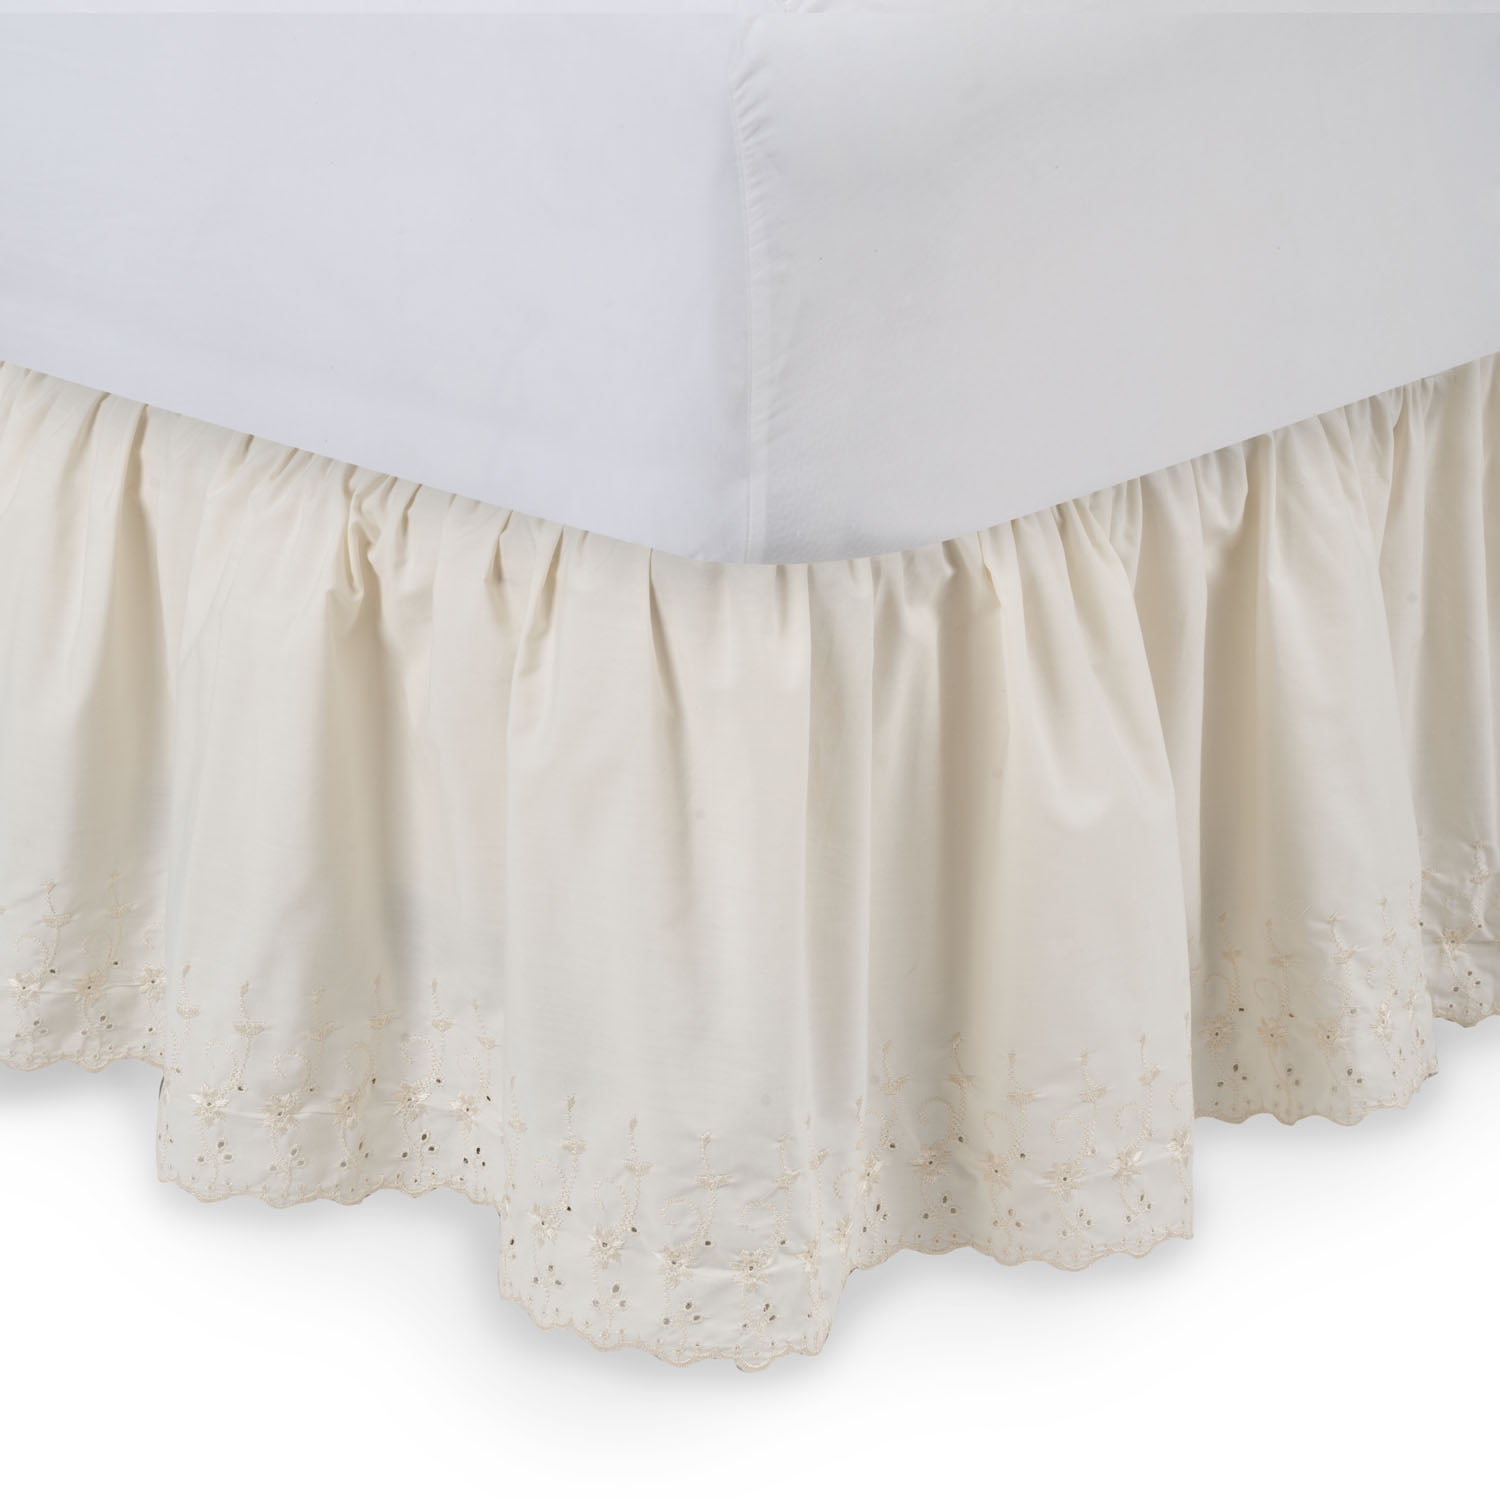 WRAP AROUND EYELET LACE BED SKIRT DUST RUFFLE 18" DROP 